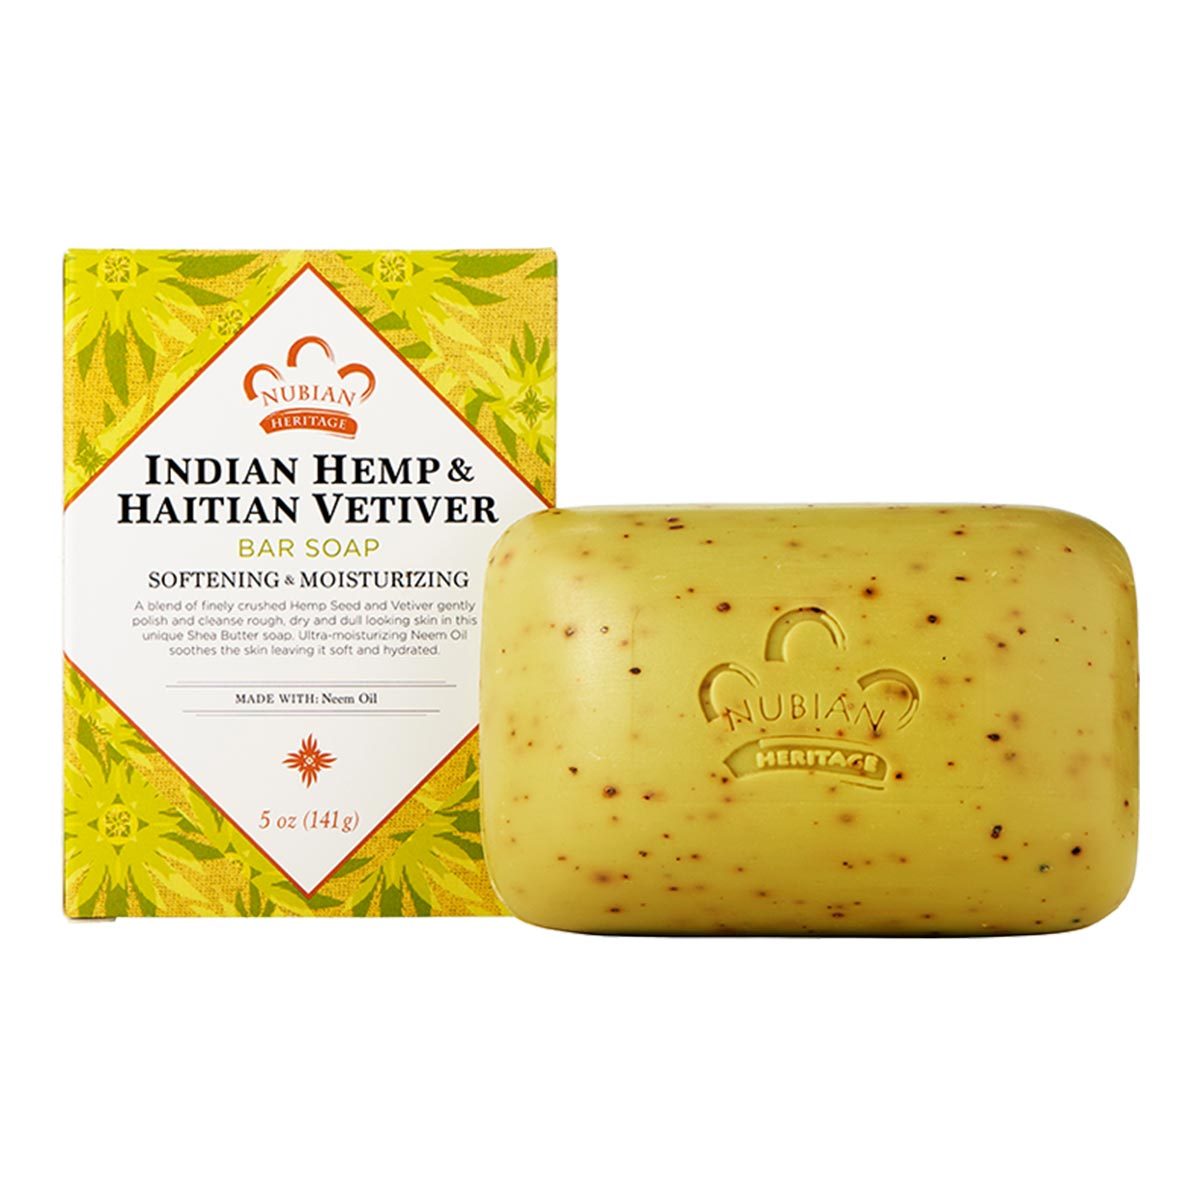 Primary image of Indian Hemp and Haitian Vetiver Soap